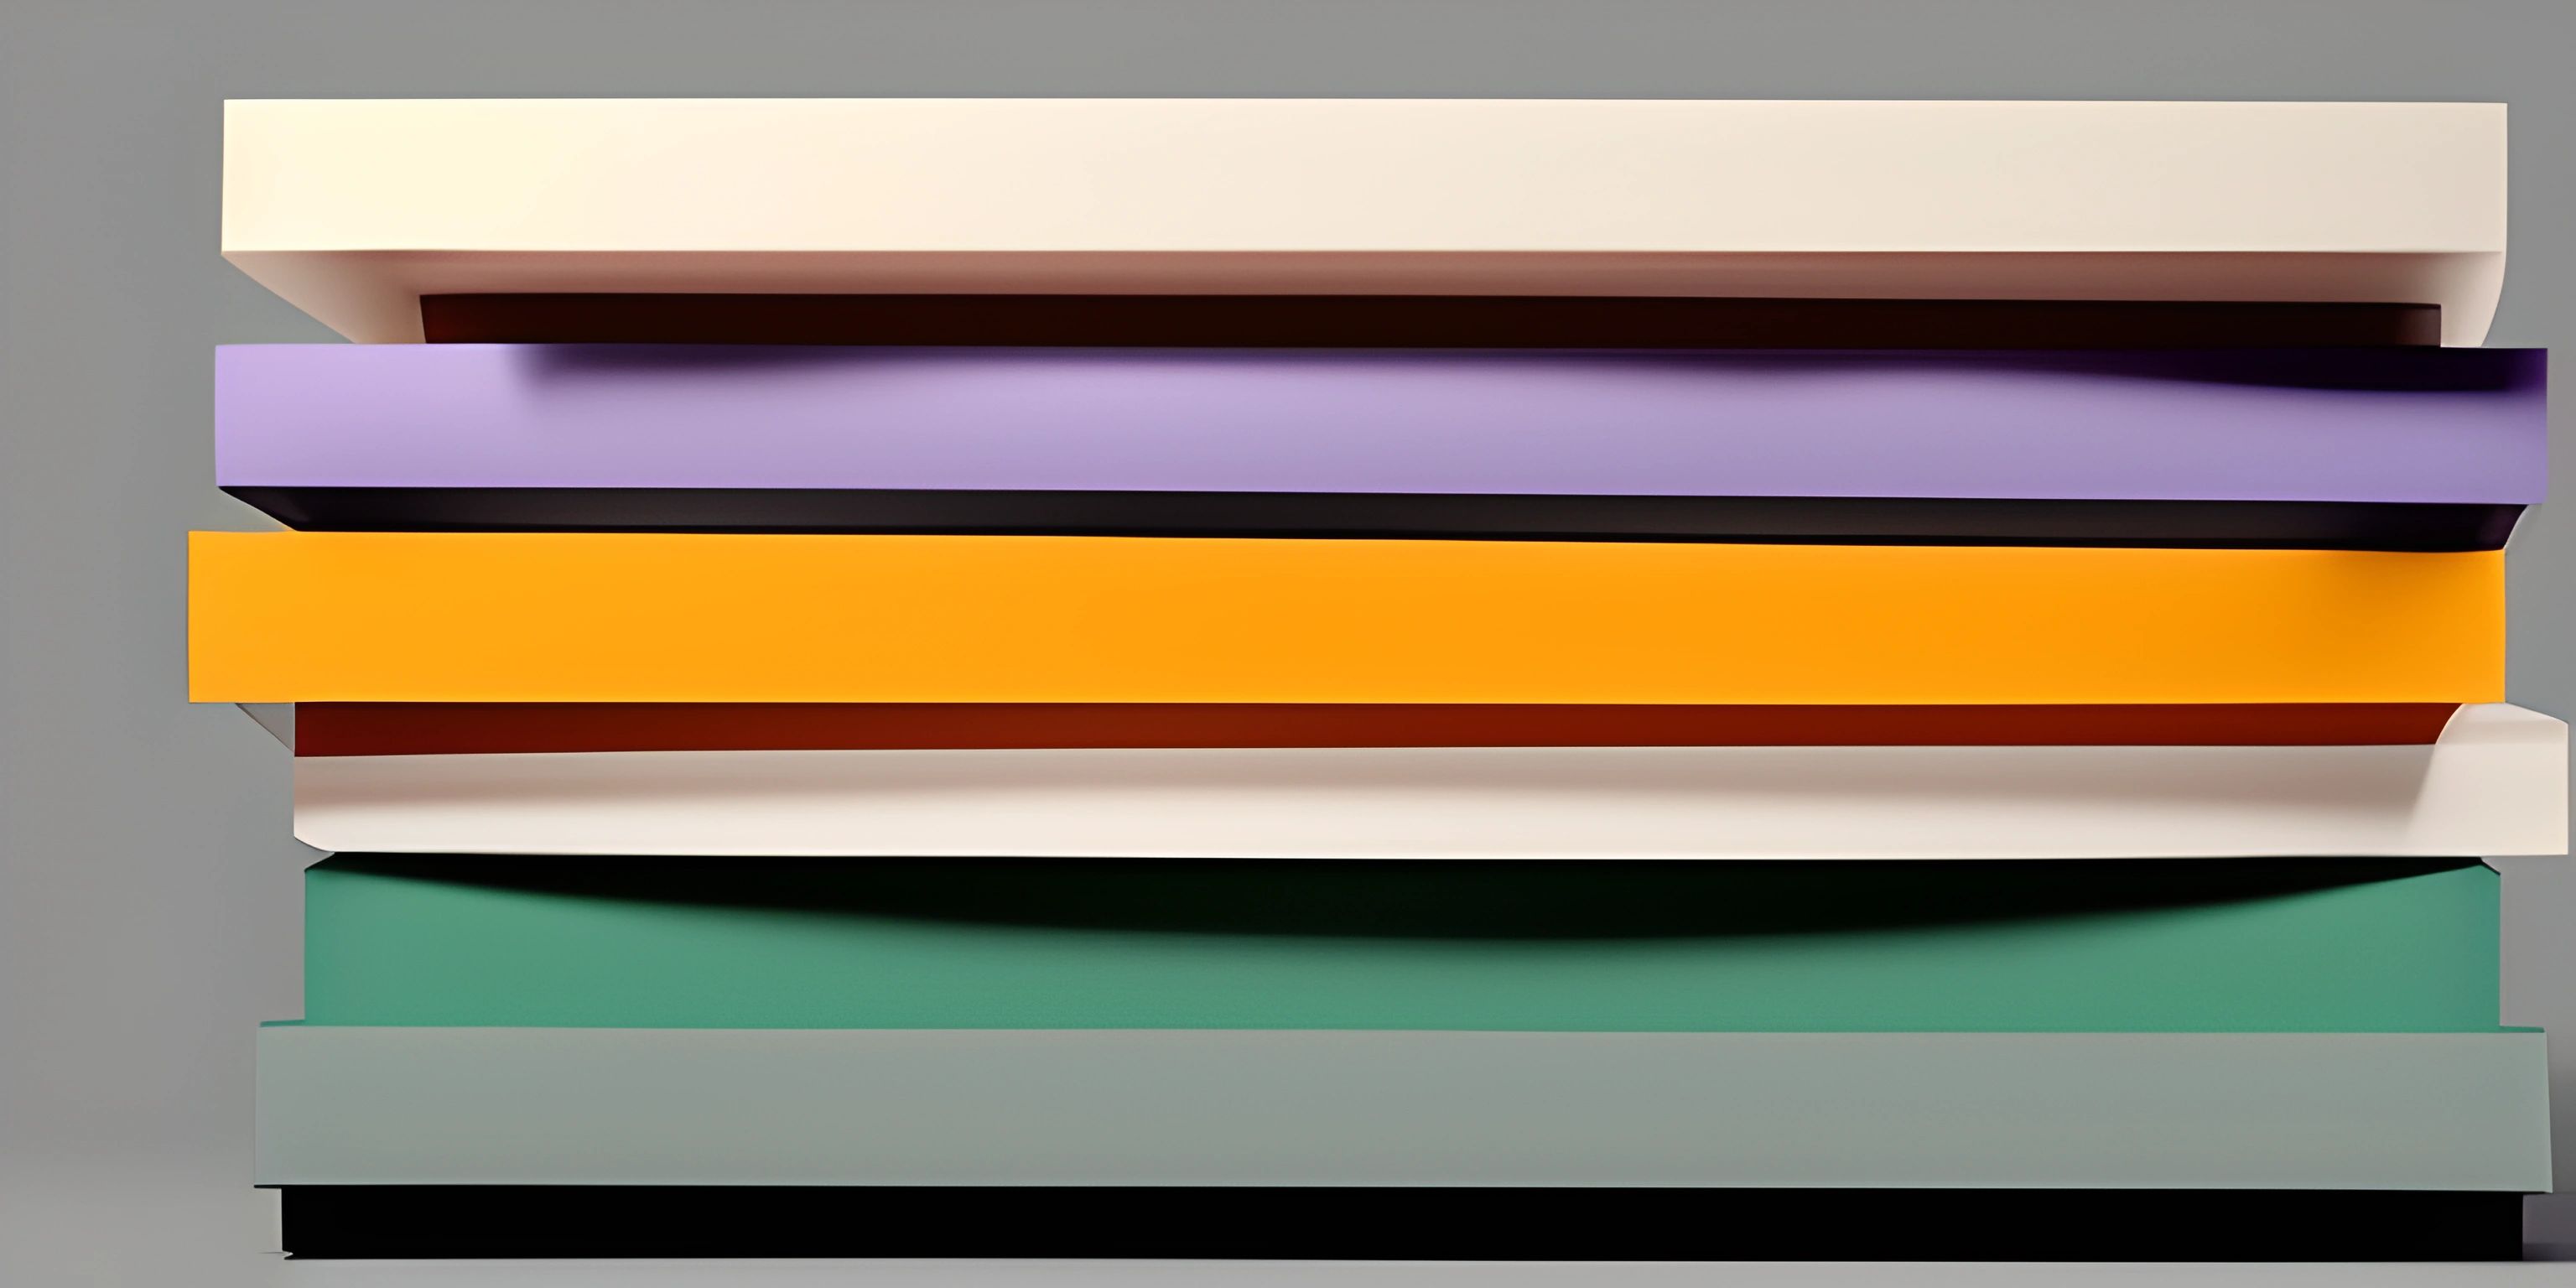 a stack of colored blocks on a gray surface - like background imagensized by shutter